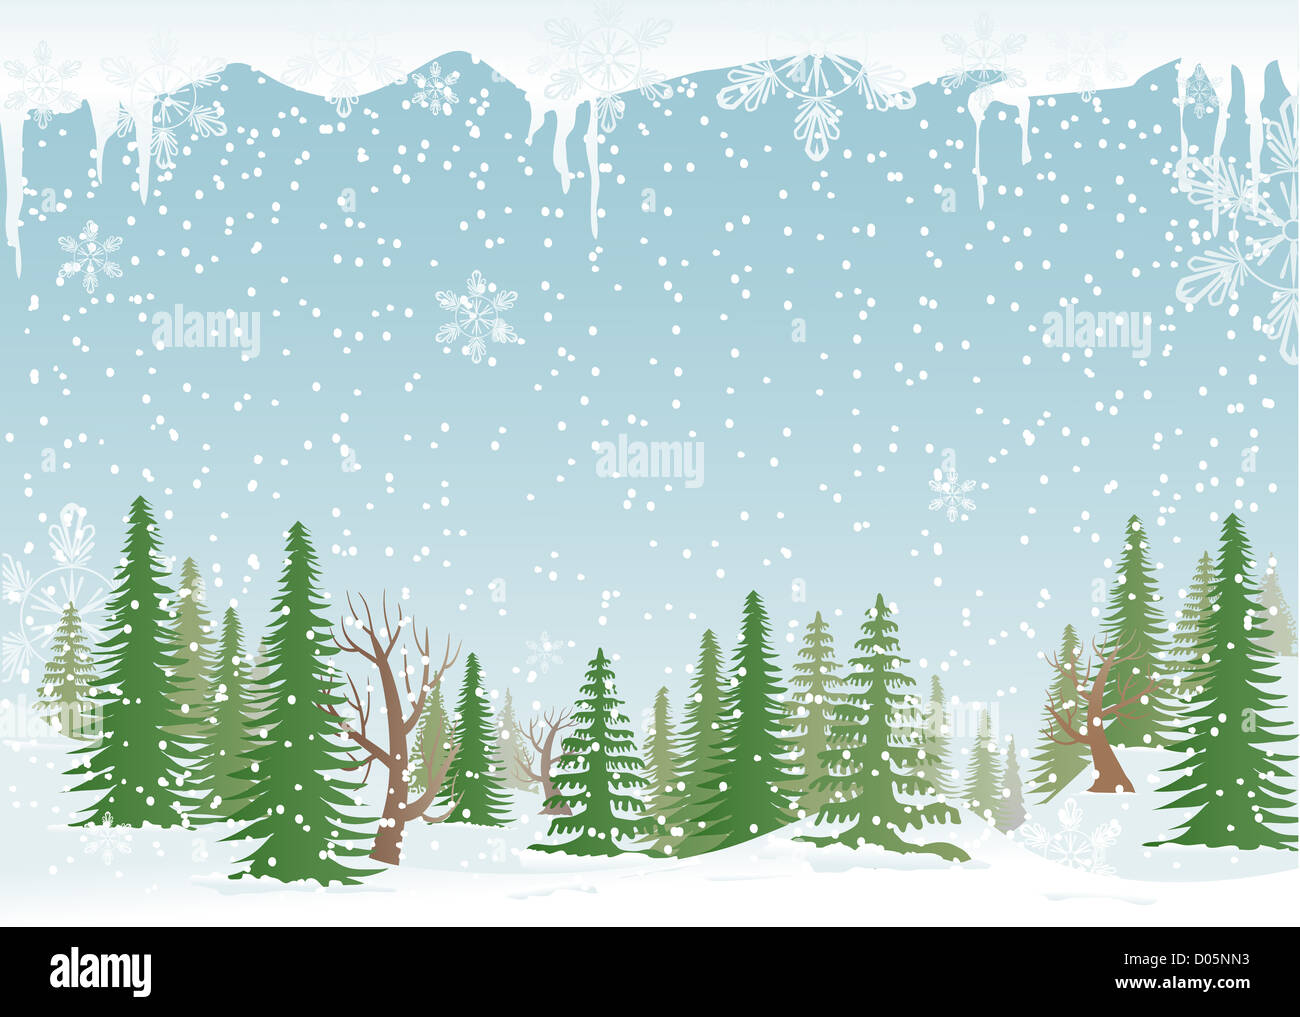 Green, snowy forest with fir-trees and snowflakes. Stock Photo